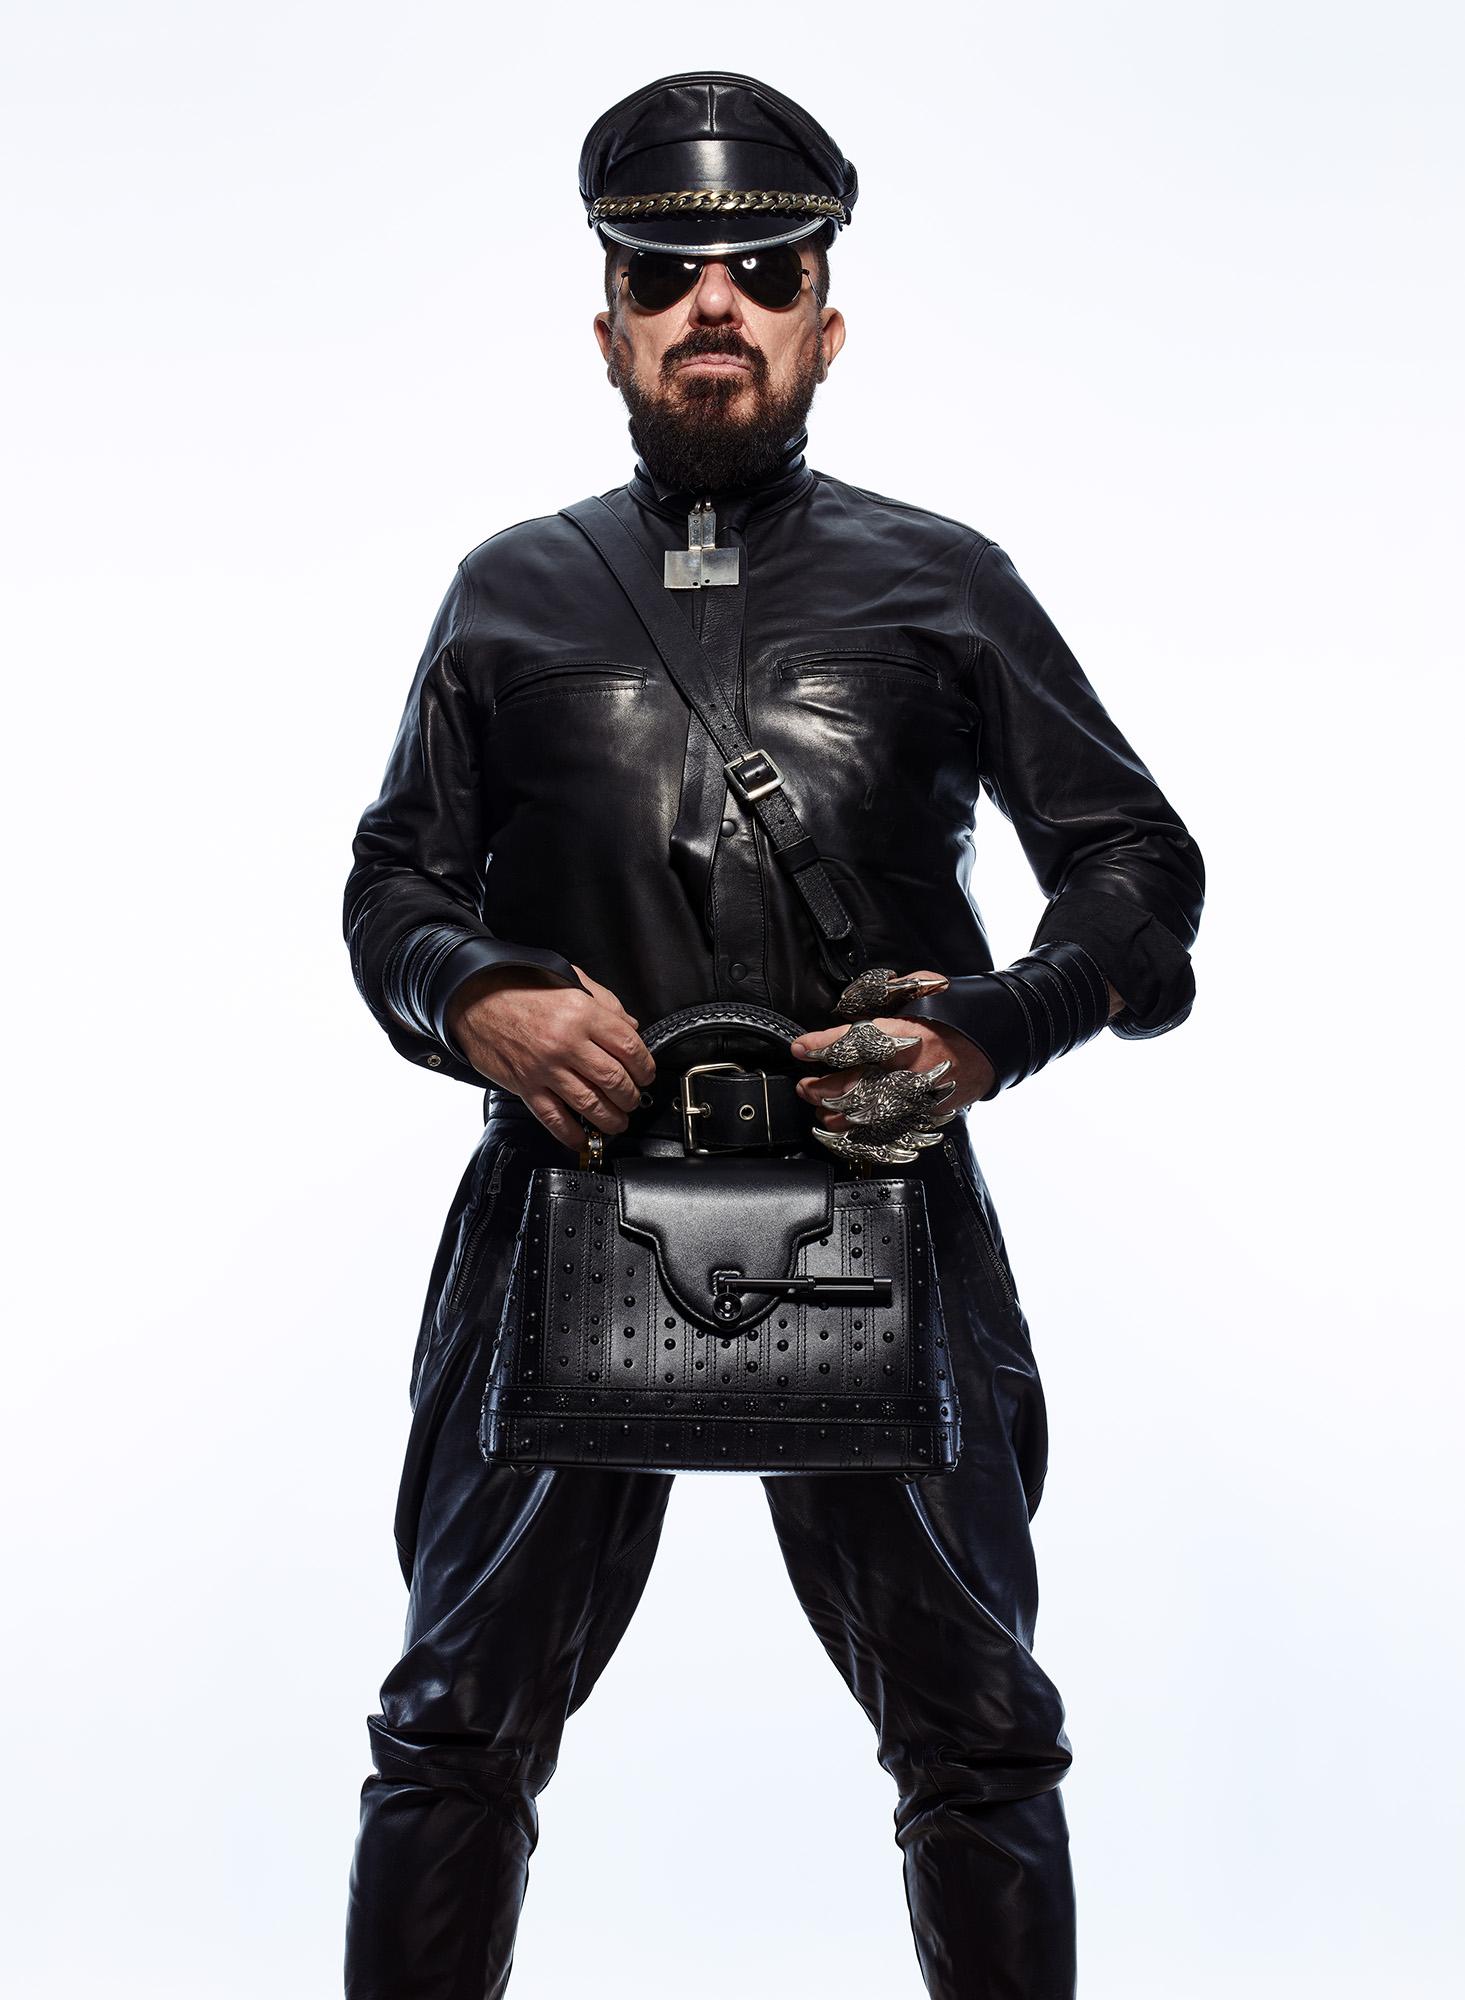  LOUIS VUITTON Artycapucines Bag MM (by Peter Marino in black smooth calfskin leather) (Price upon request, available at select Louis Vuitton boutiques.)